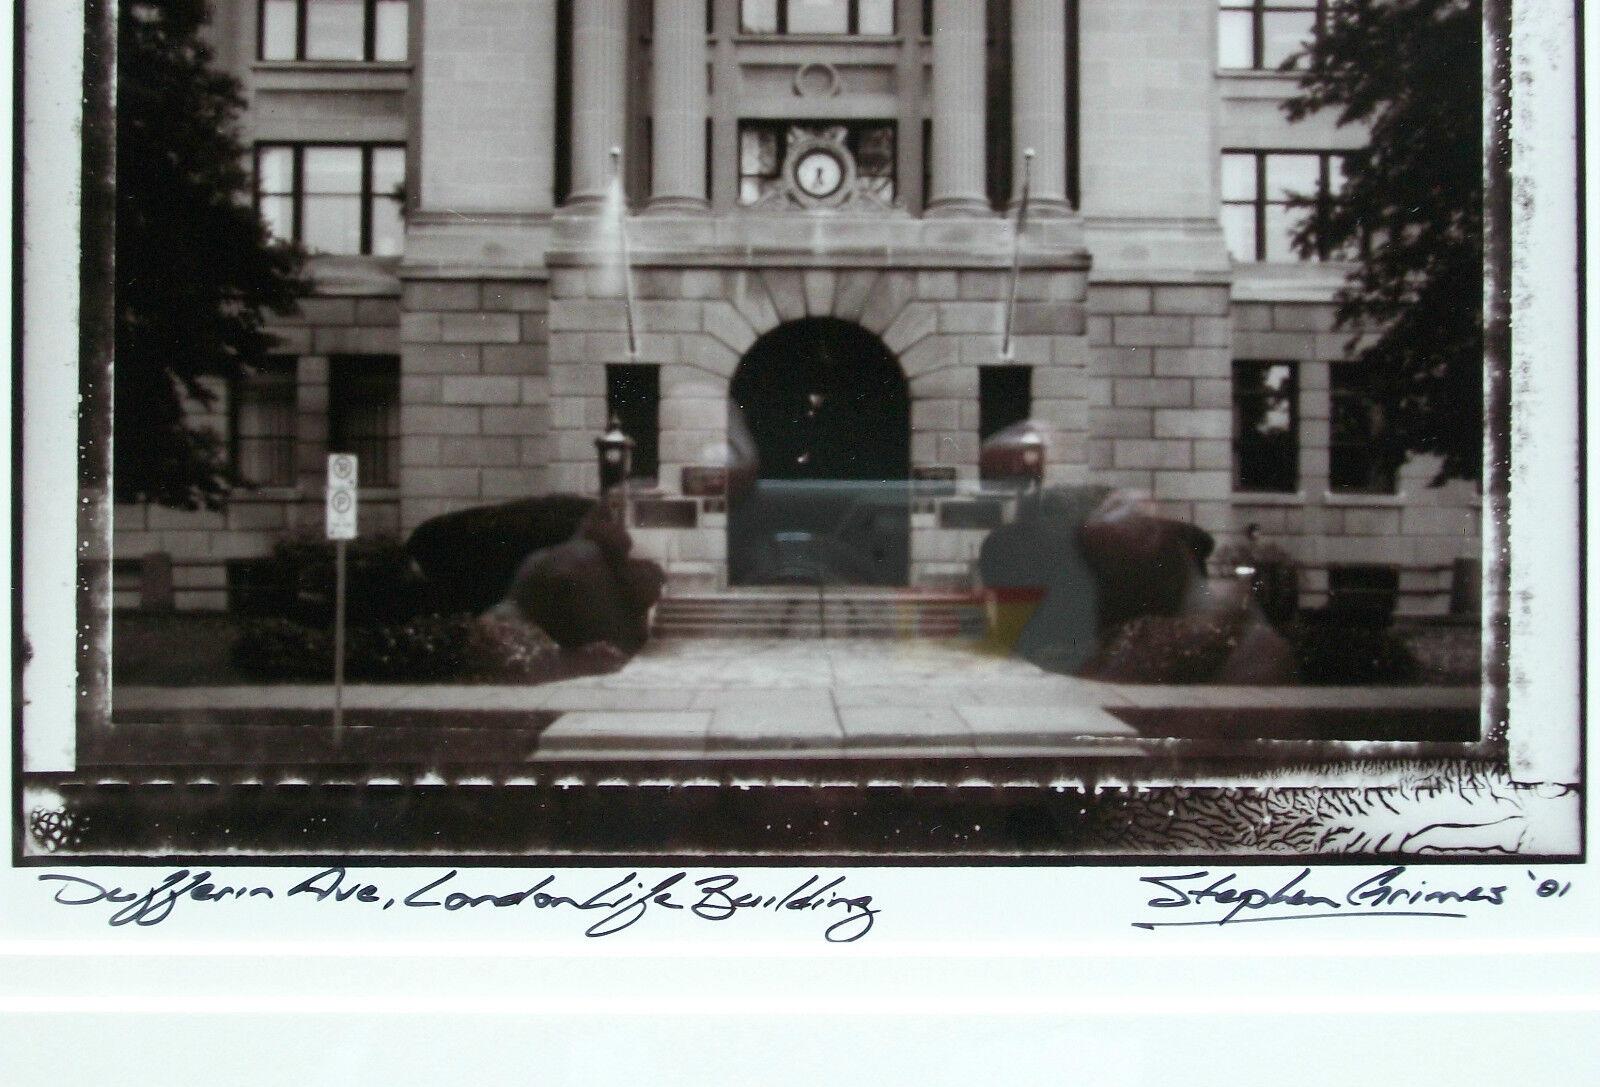 STEPHEN GRIMES - 'London Life Building' - Vintage Photograph - Signed - C. 1981 In Good Condition For Sale In Chatham, ON